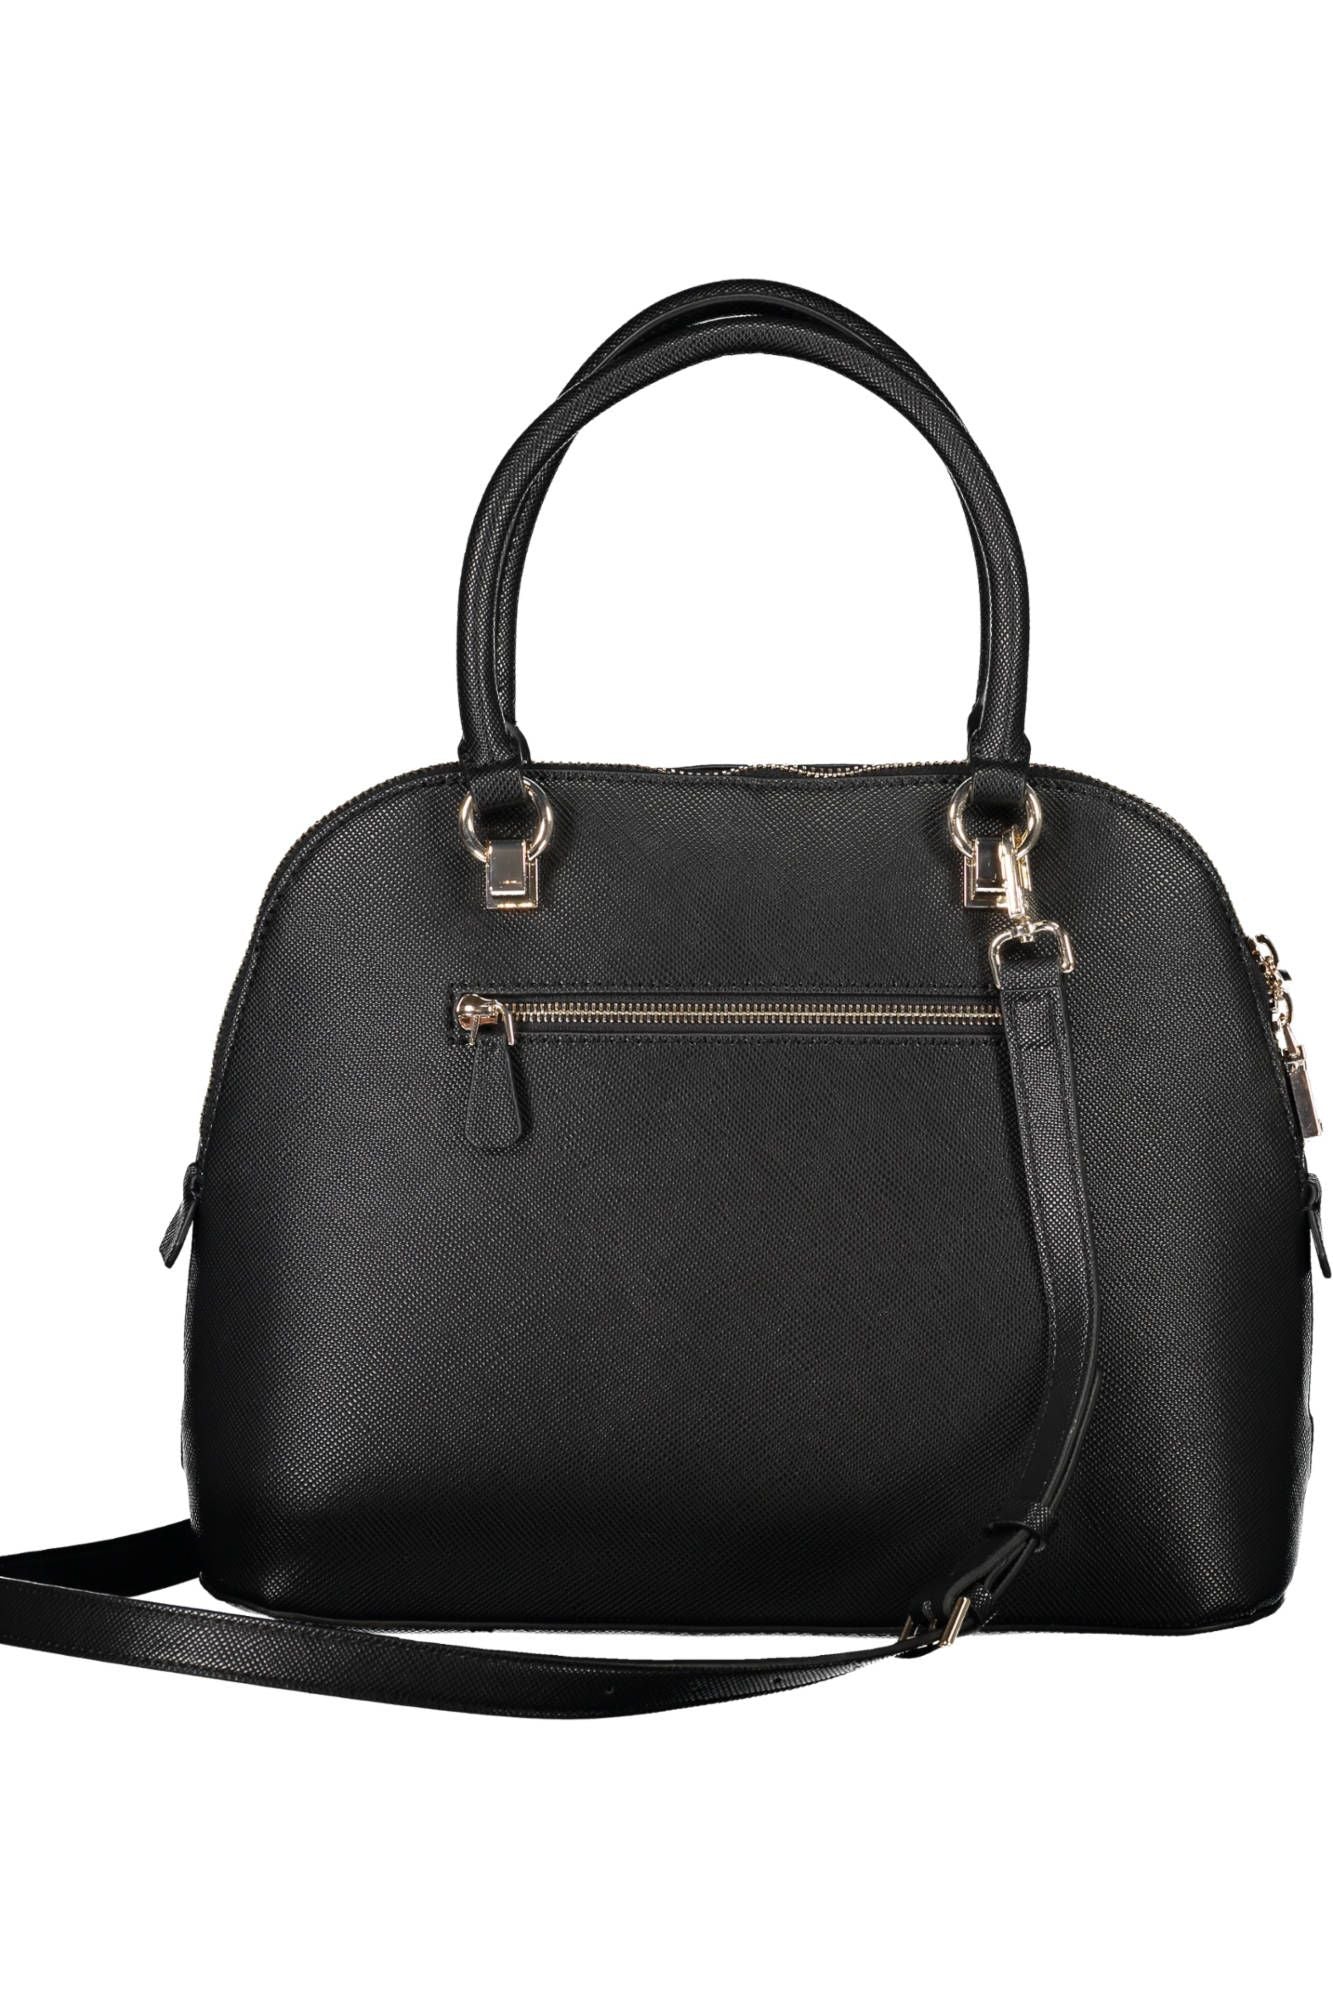 Chic Black Guess Handbag with Contrasting Details